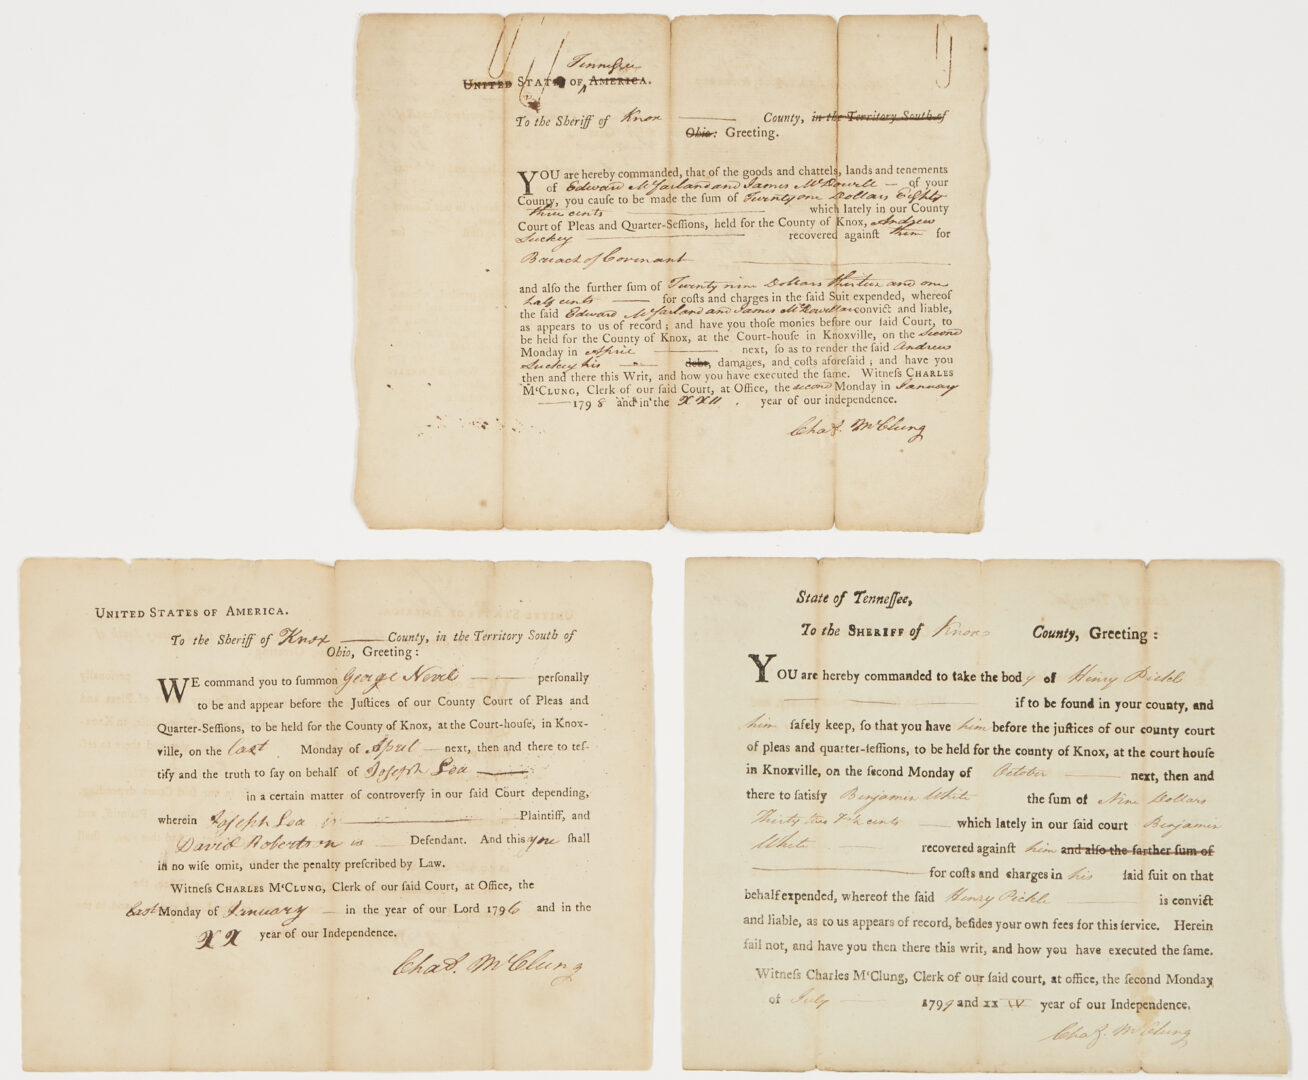 Lot 600: 7 Knoxville 18th Century Charles McClung signed Legal Documents